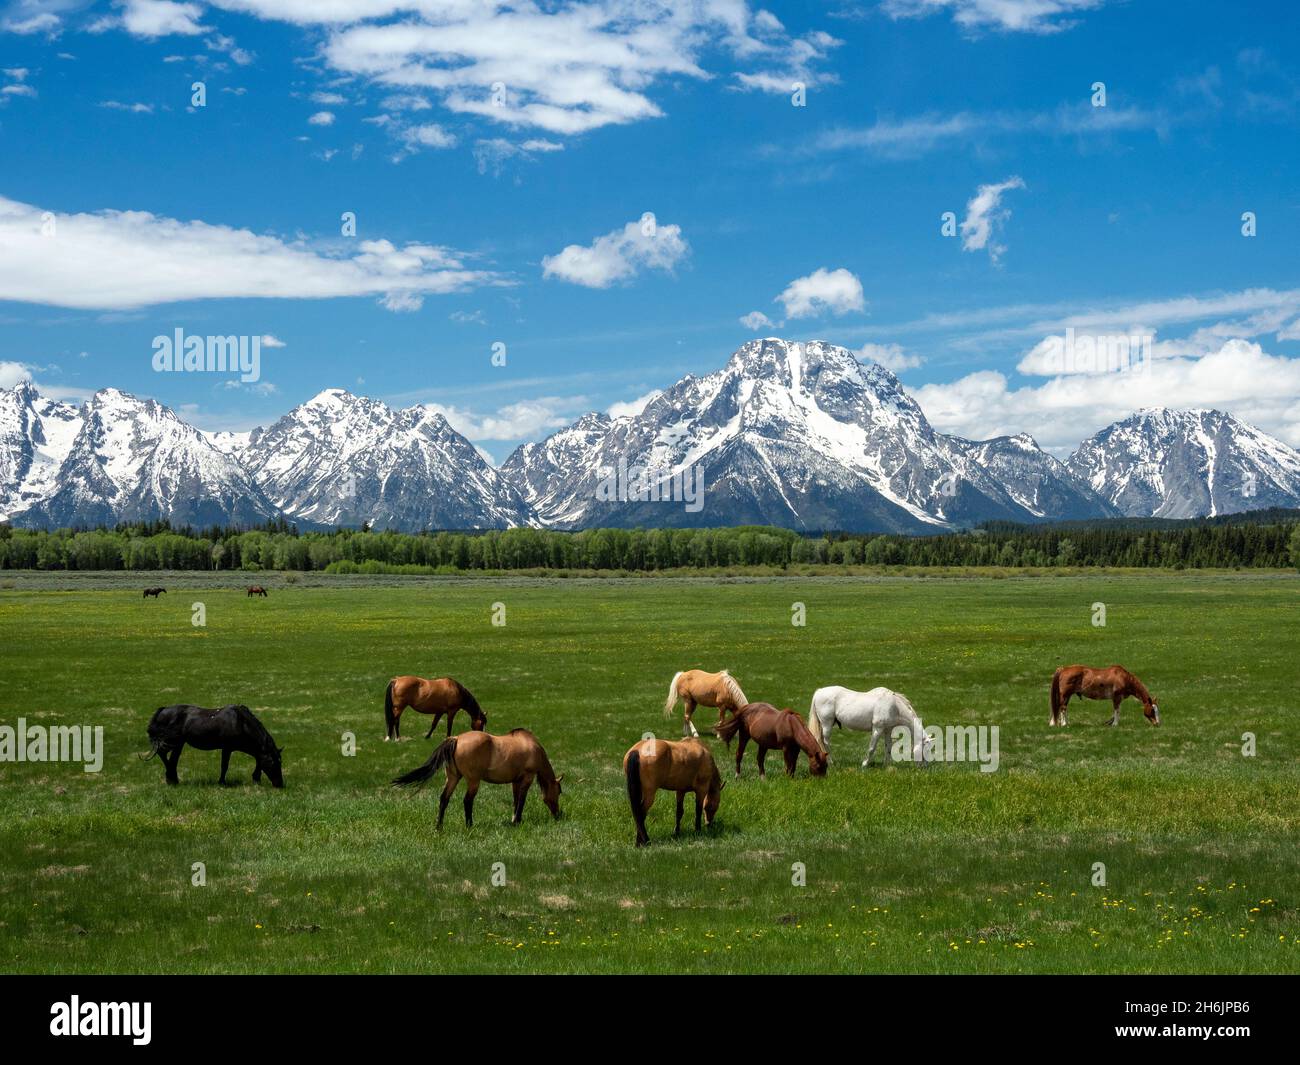 Adult horses (Equus ferus caballus, grazing at the foot of the Grand Teton Mountains, Wyoming, United States of America, North America Stock Photo